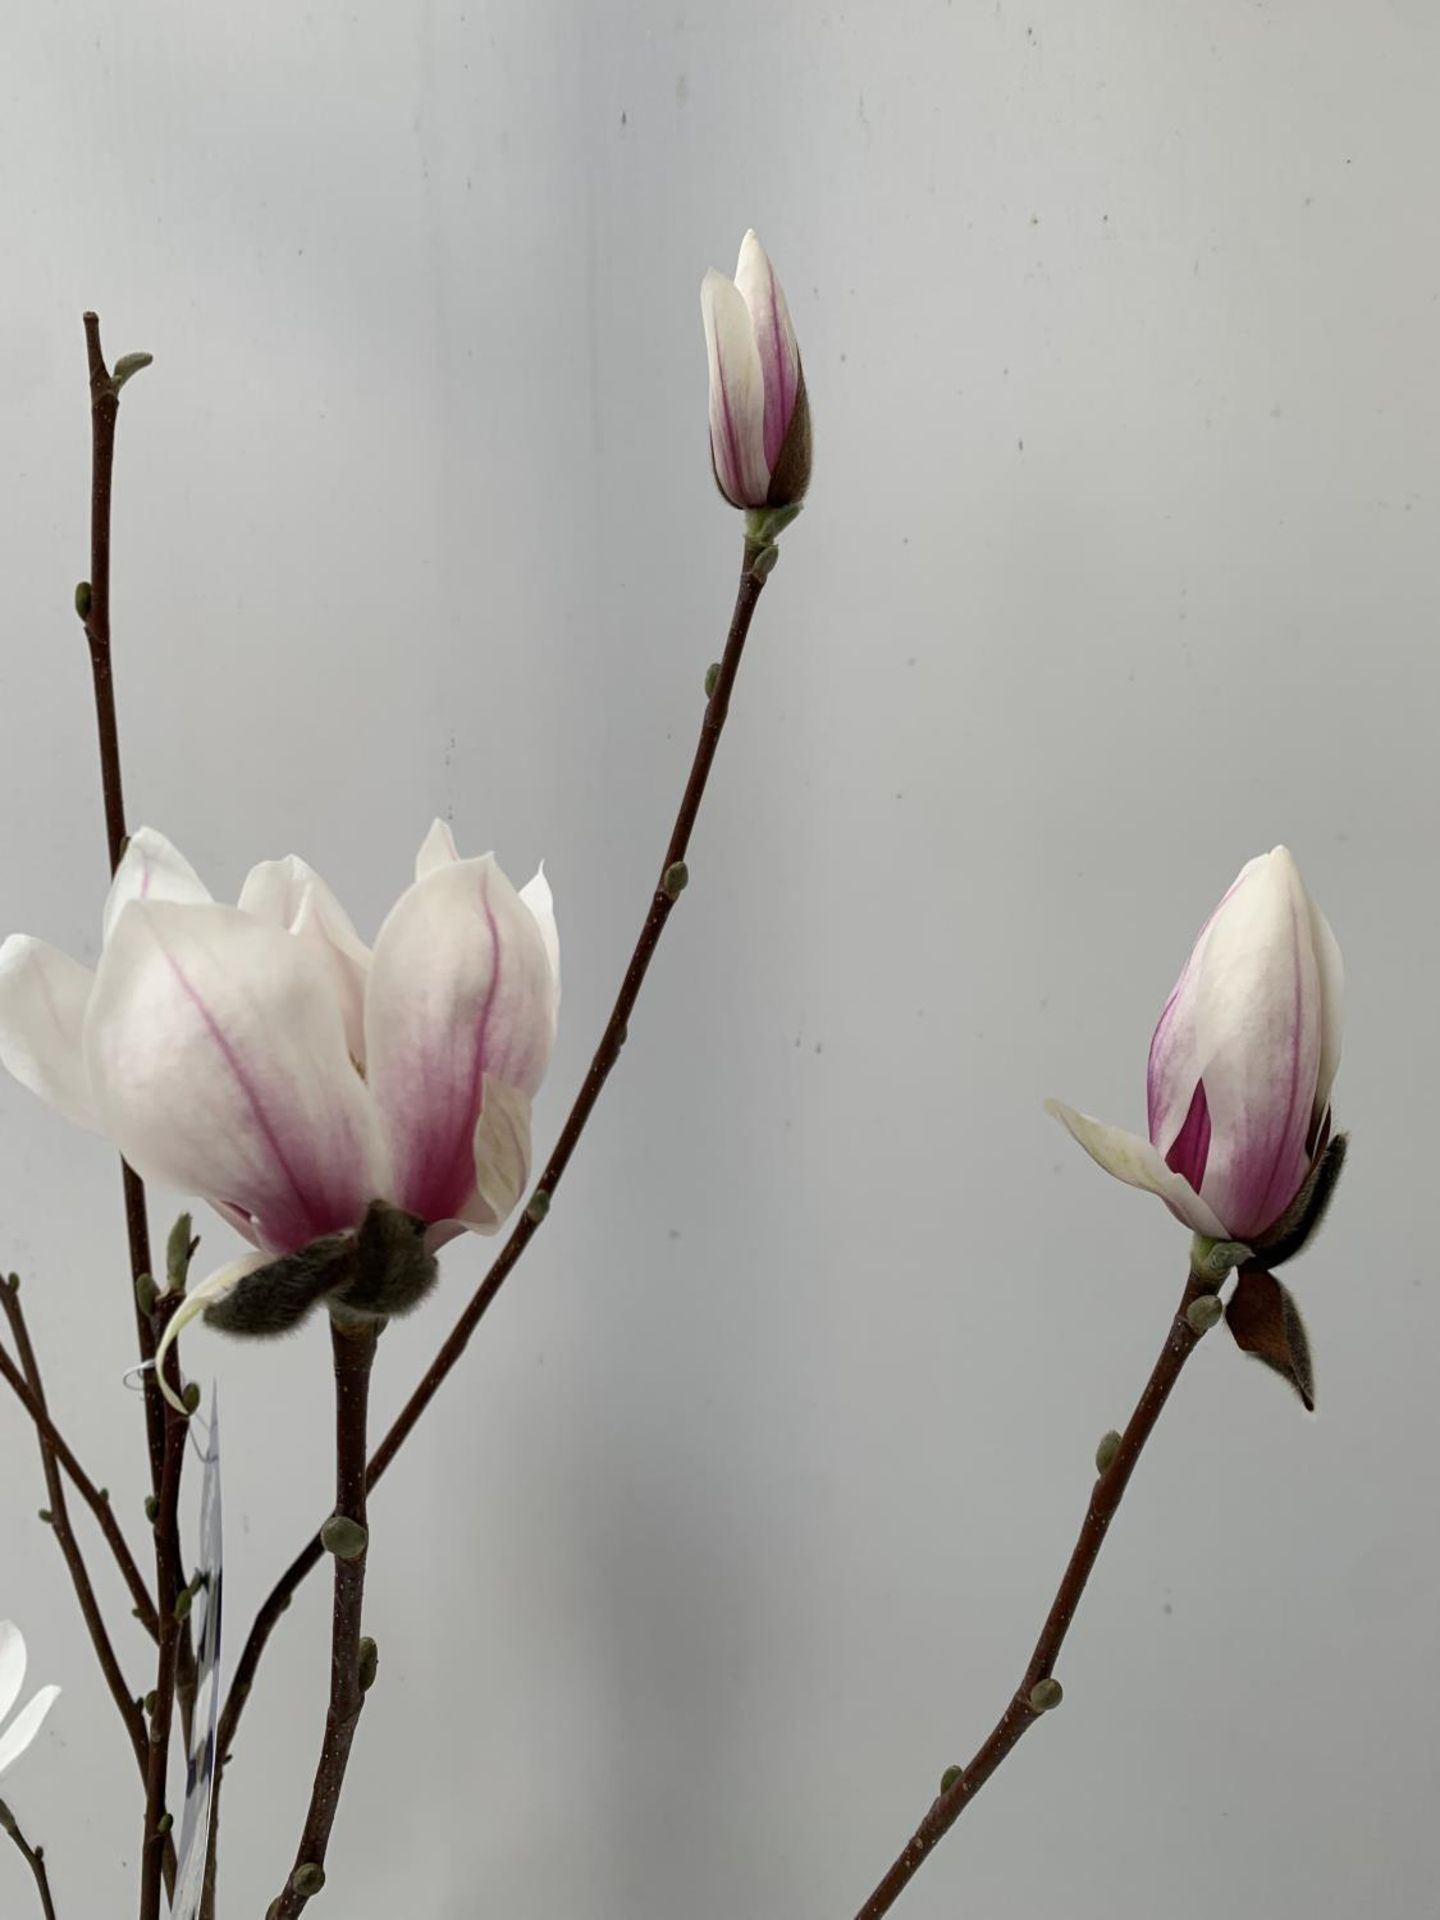 ONE MAGNOLIA SOULANGEANA 'SUPERBA' APPROX 120CM IN HEIGHT IN A 7 LTR POT PLUS VAT - Image 8 of 14